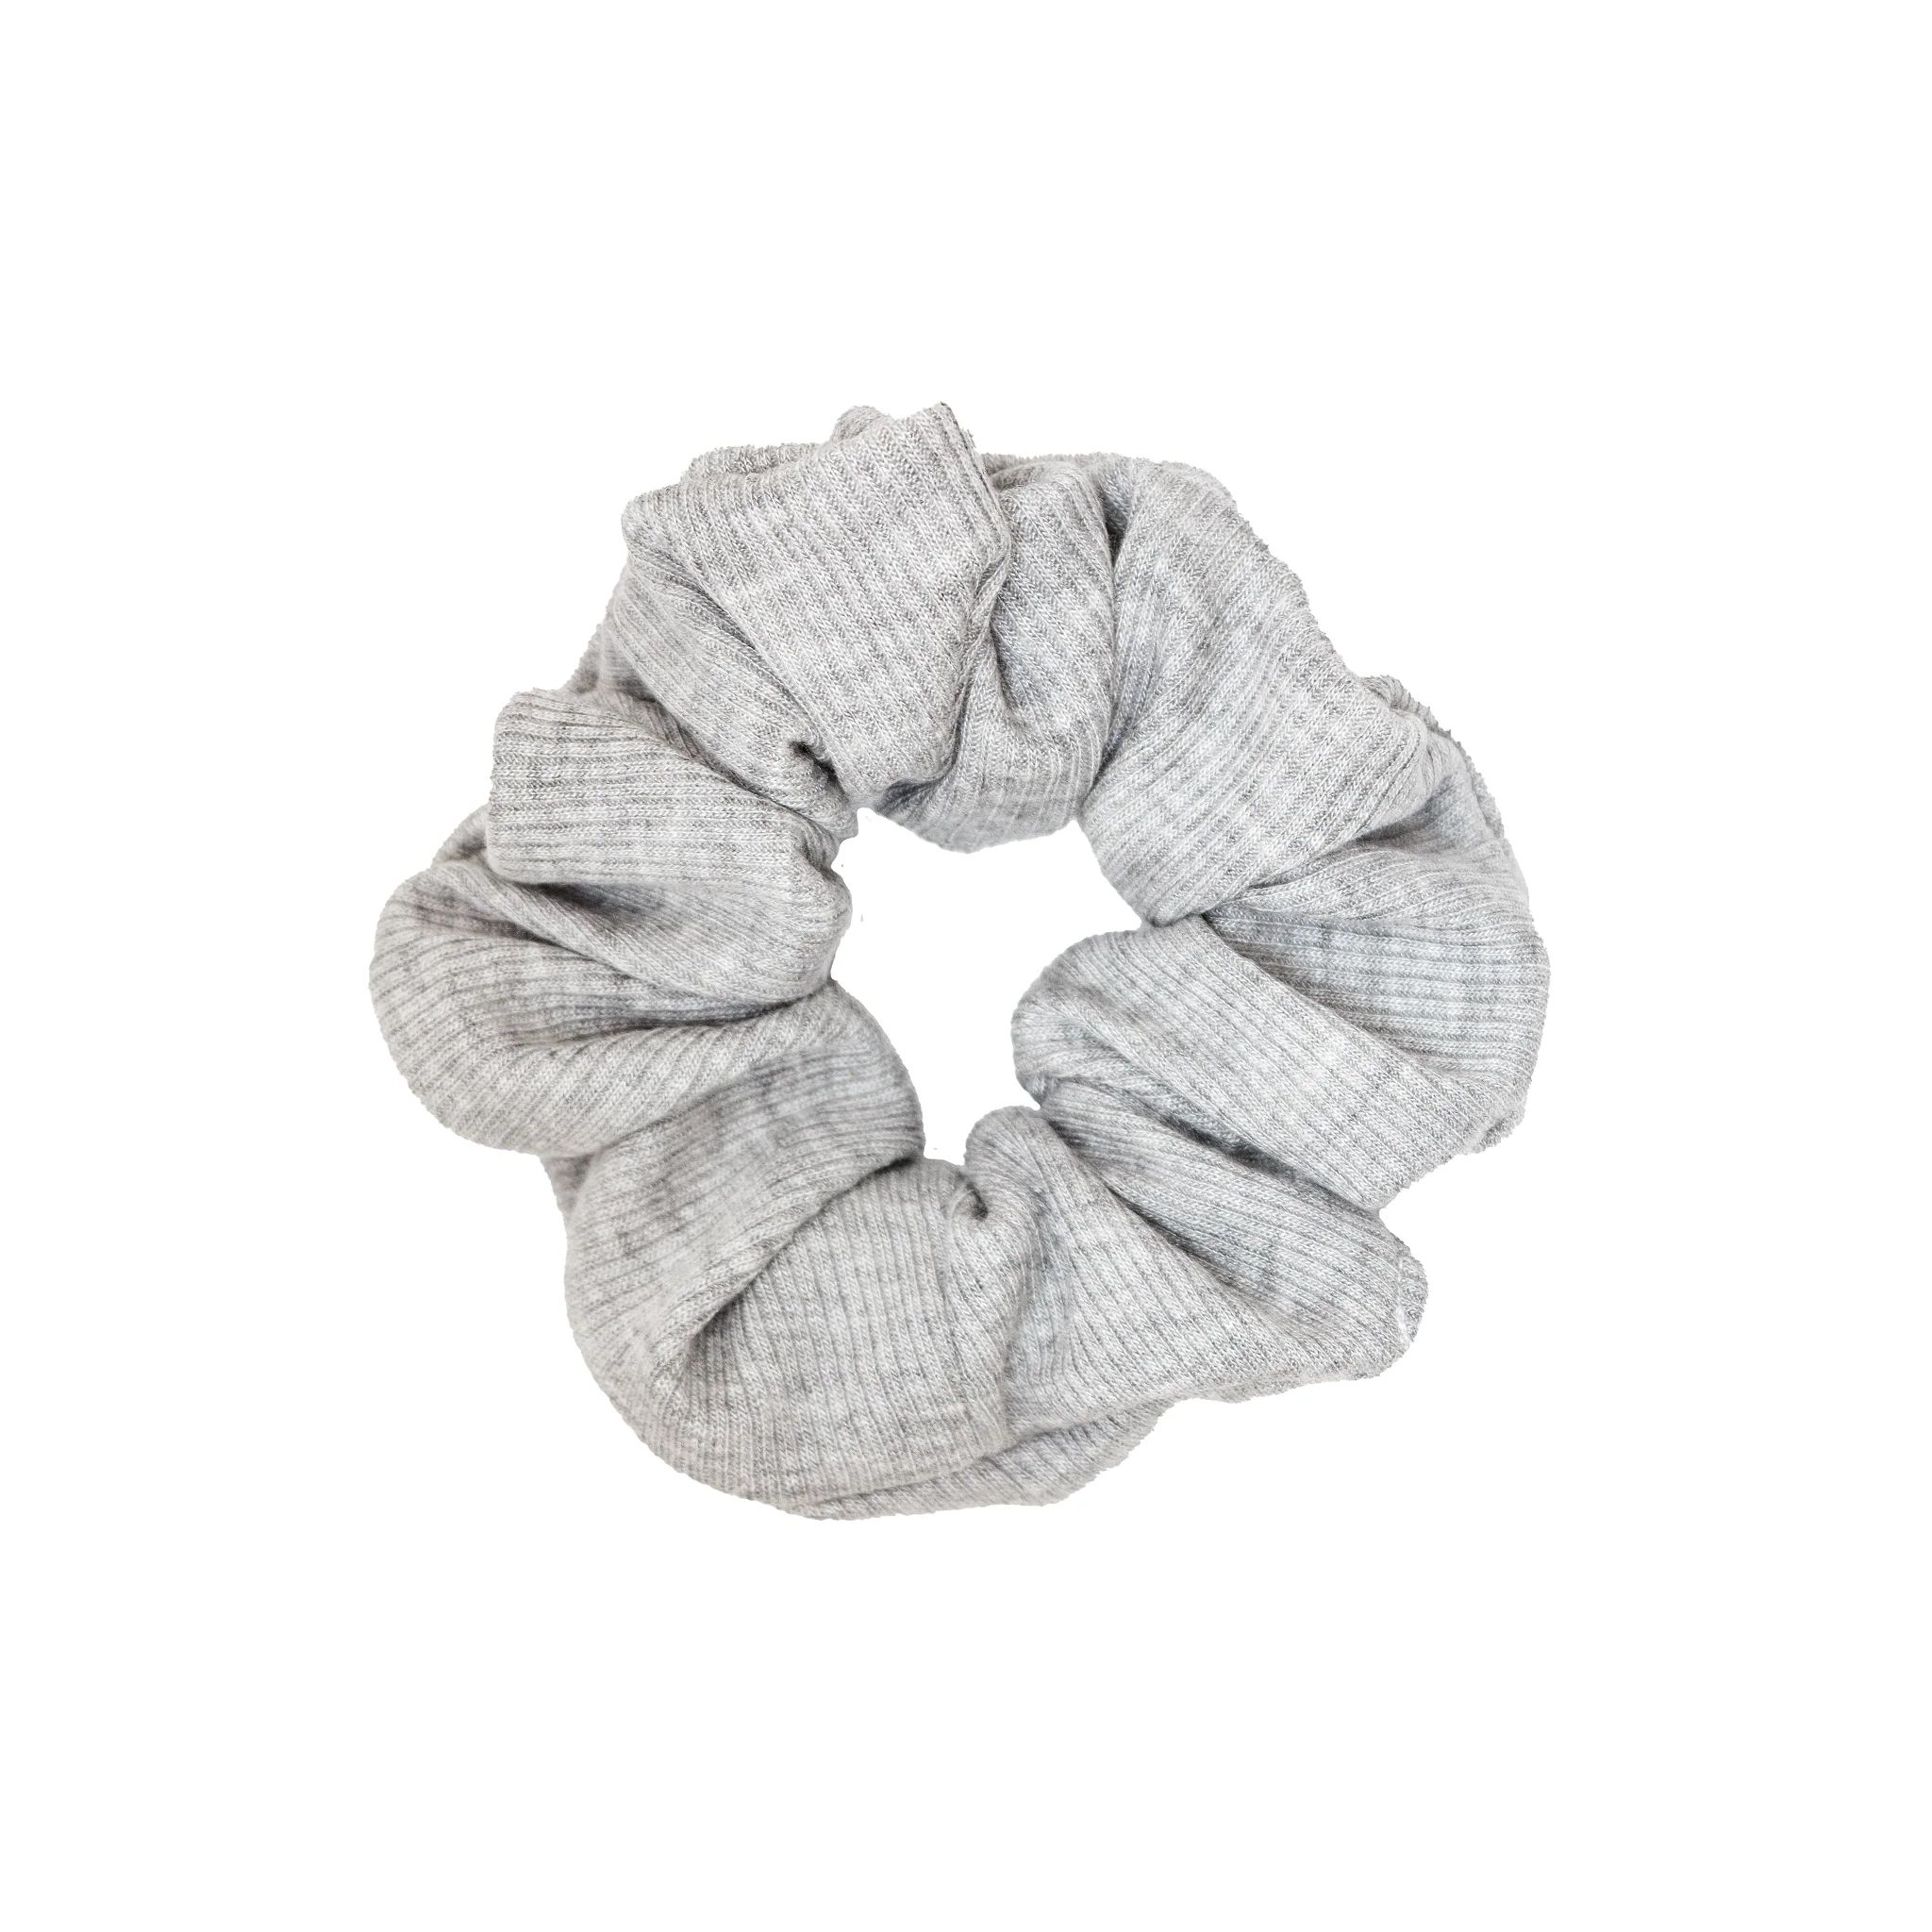 Cotton Scrunchie in Ribbed Heather Grey | Emi Jay